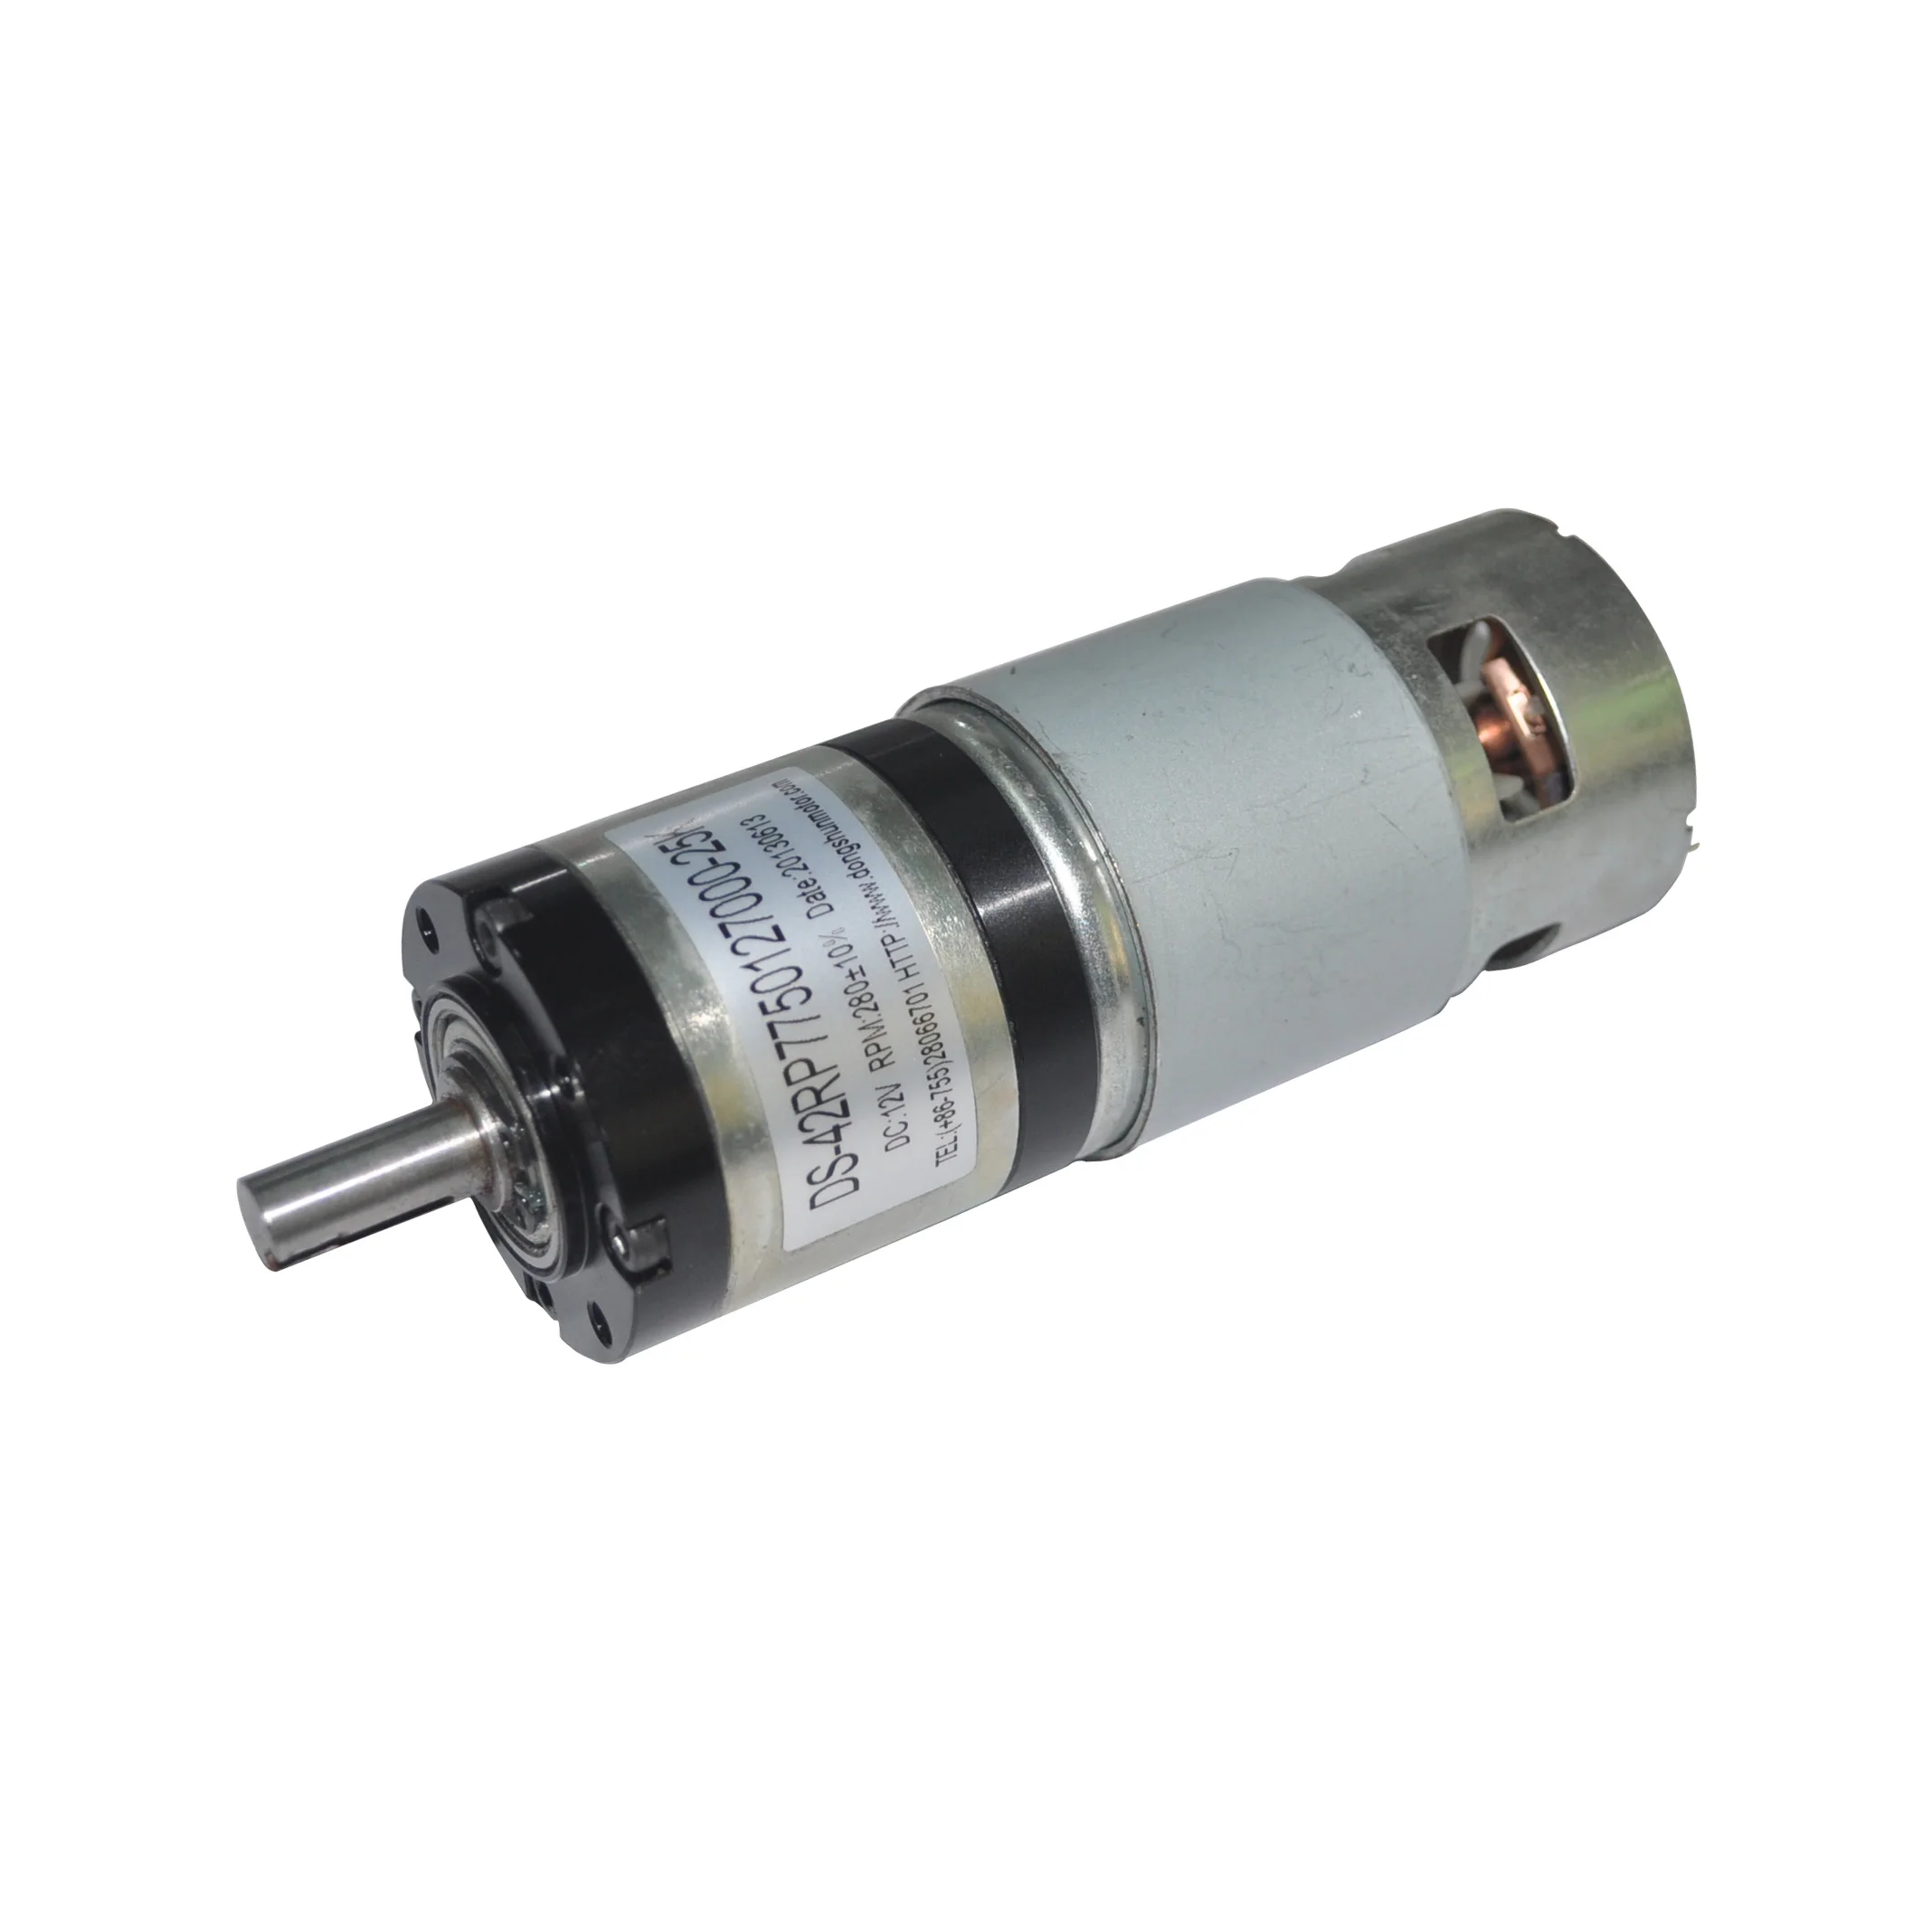 DSD 775 Motor High Speed ​​10nm Torque DC Motor Na May 42mm Planetary Reduction Gearbox